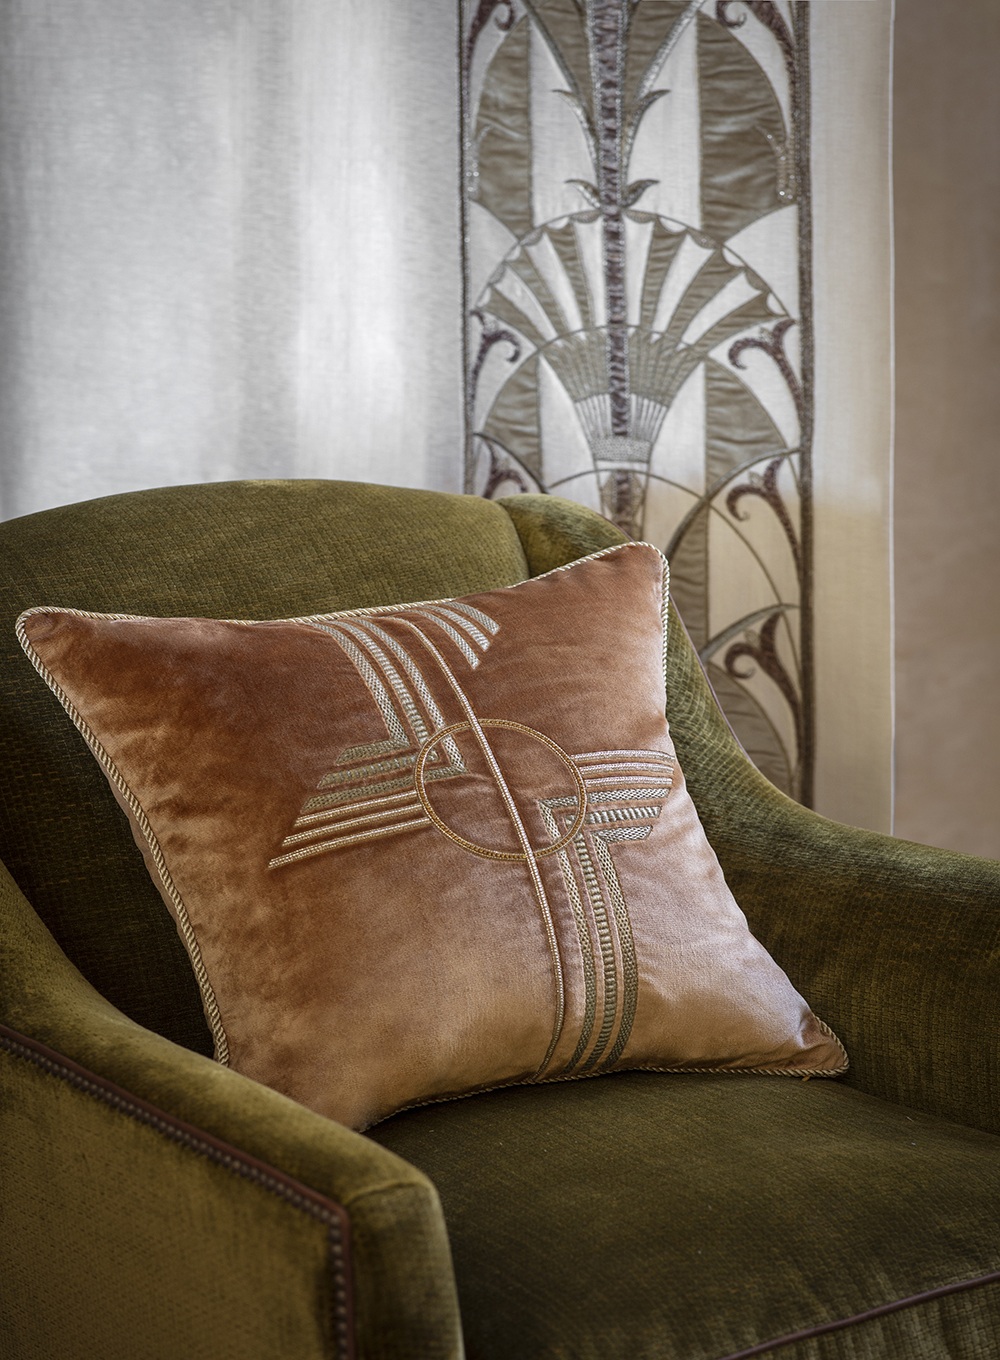 Earhart cushion in Capri silk velvet - Copper with Edgar chair in Troilus - Lichen and Montano embroidery on drapes in Lagan - Oyster